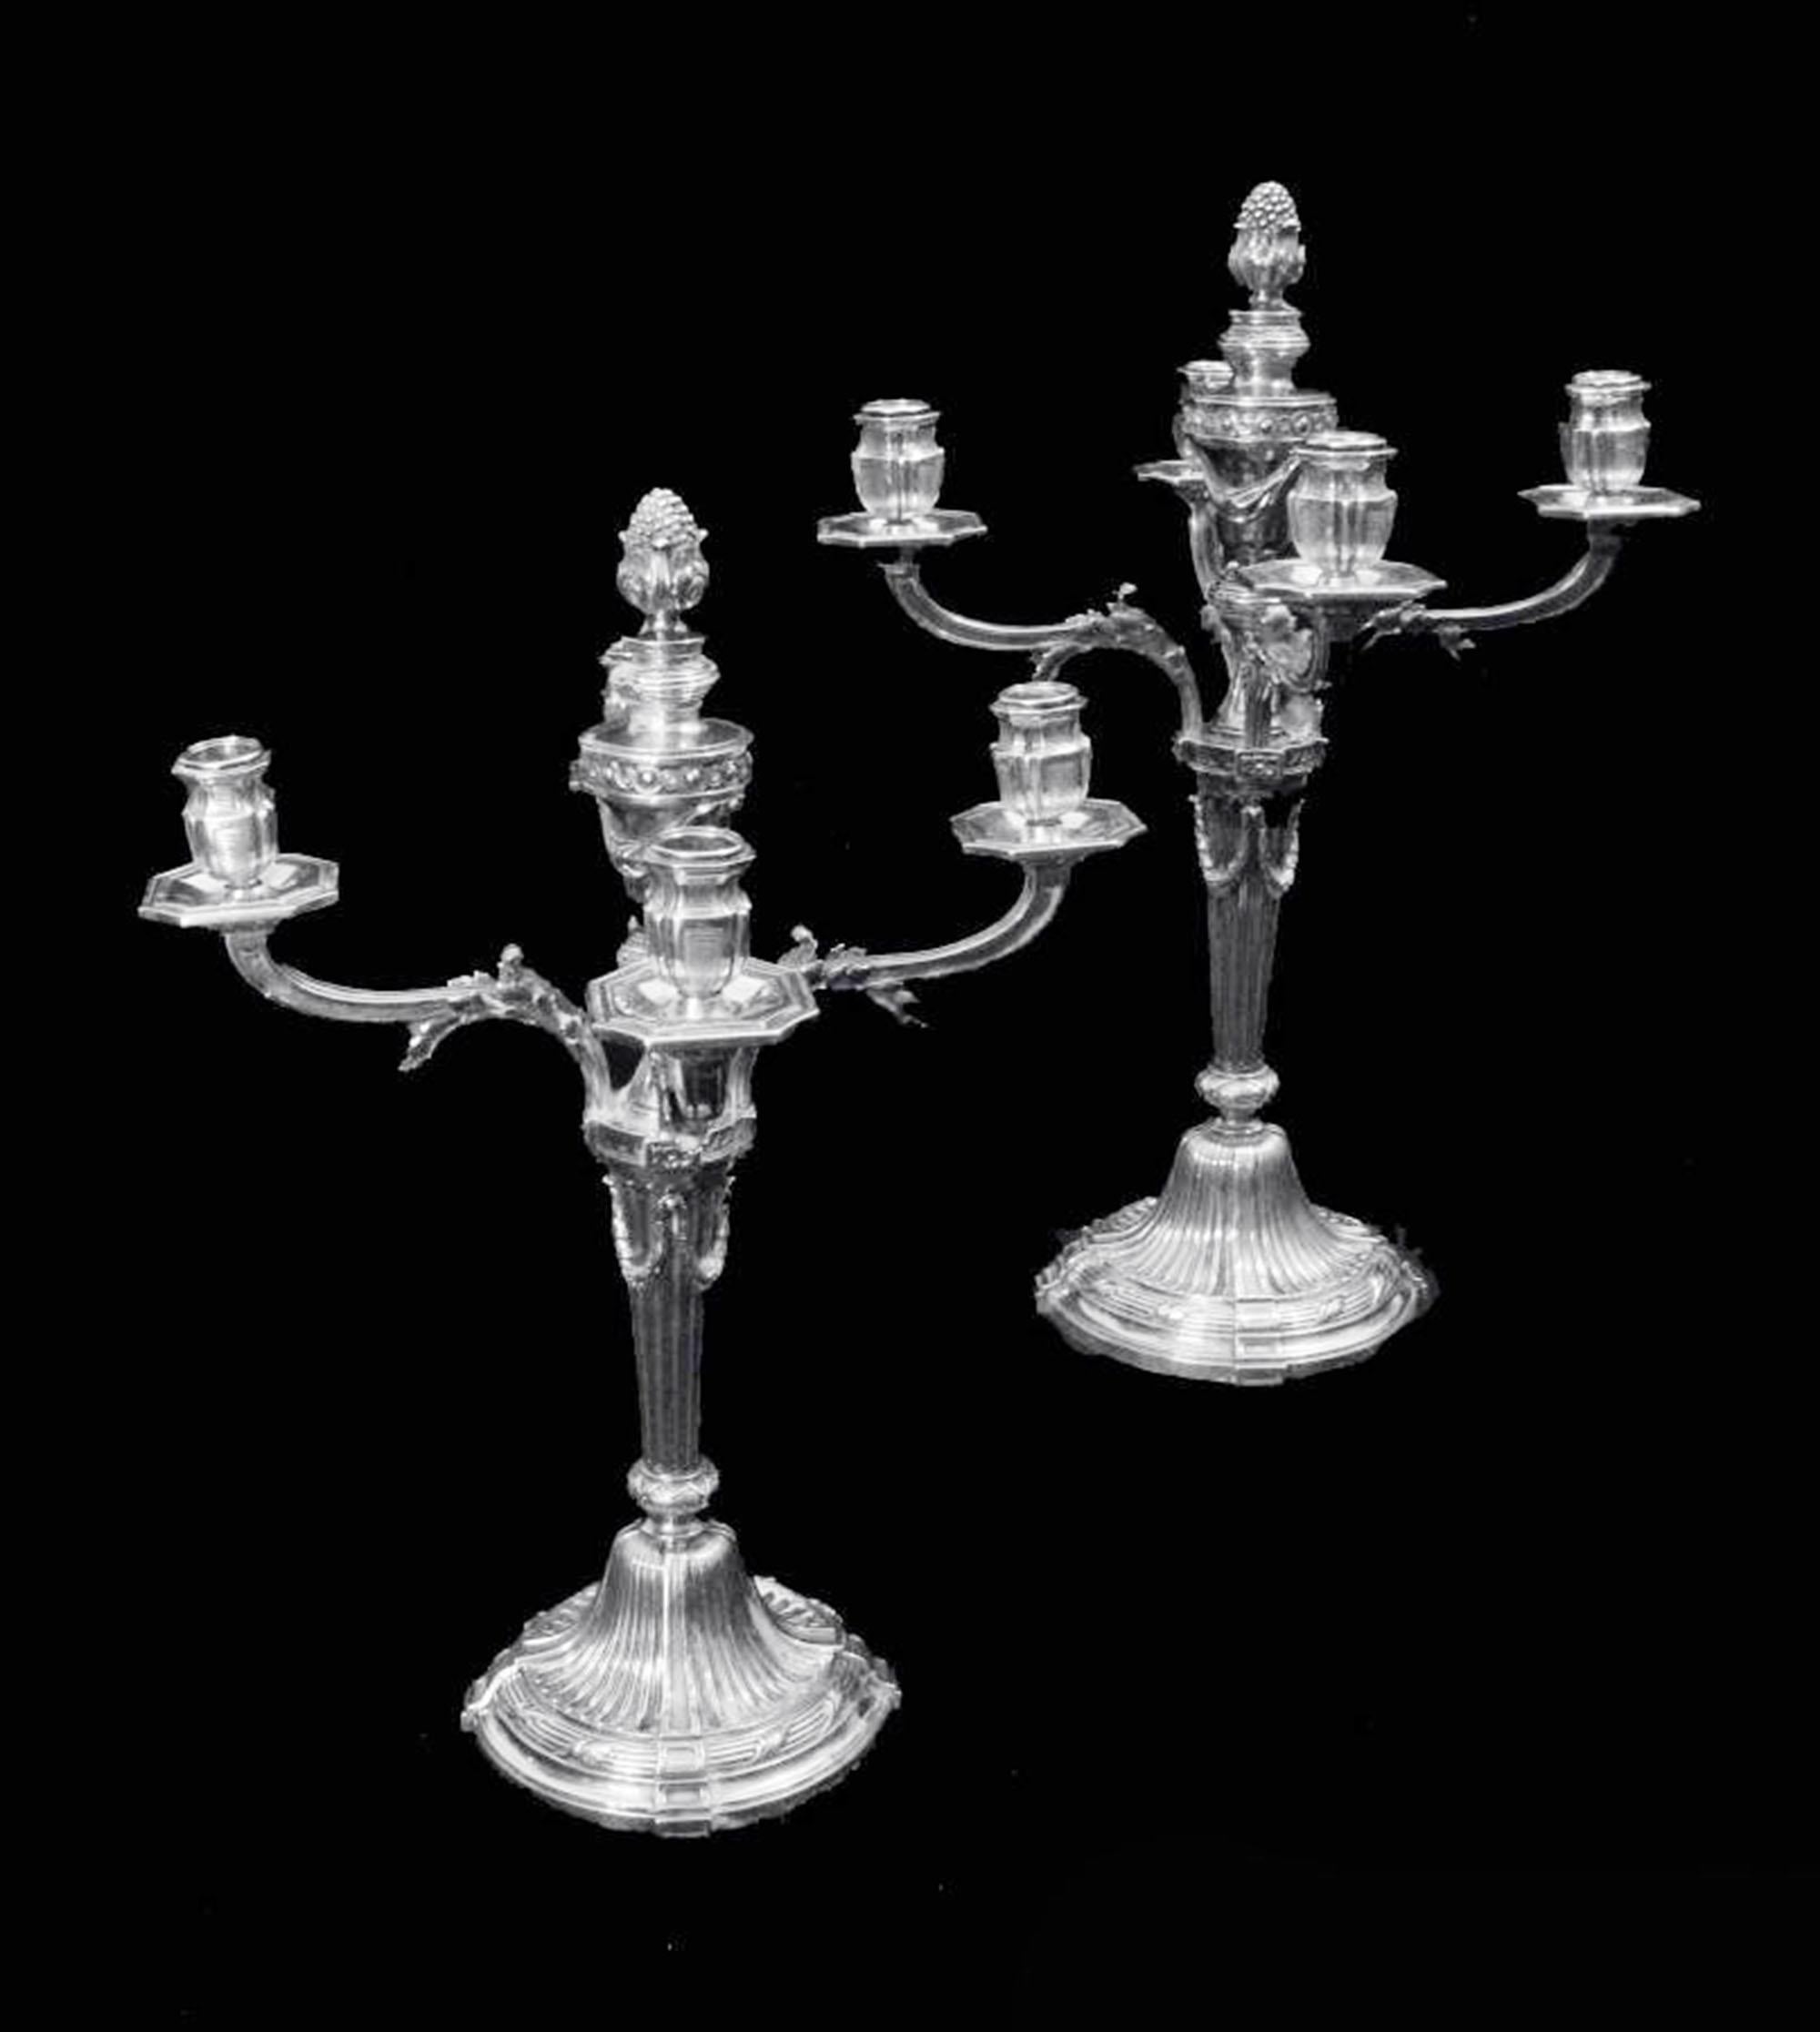 Direct from a Private Villa near Cannes, A Stunning Pair of Privately Commissioned Louis XVI, 5-Candle 950 Sterling Silver Candelabra by France's Premier Silversmiths Jacques and Pierre Cardeilhac (Christofle), Silversmiths to the Aristocracy of